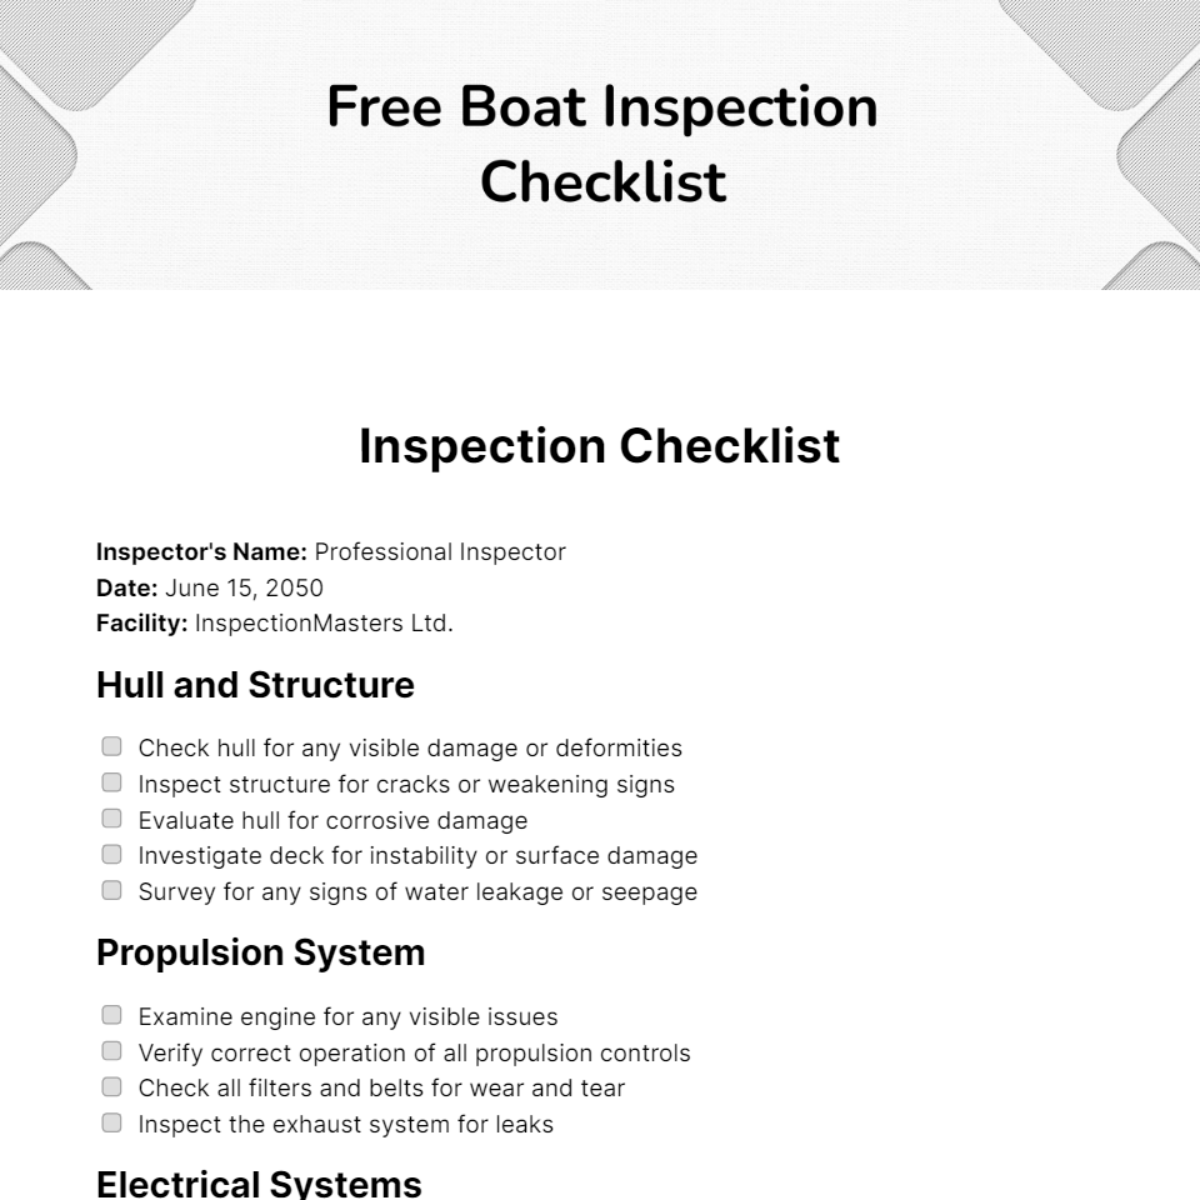 Free Boat Inspection Checklist Edit Online And Download 9304